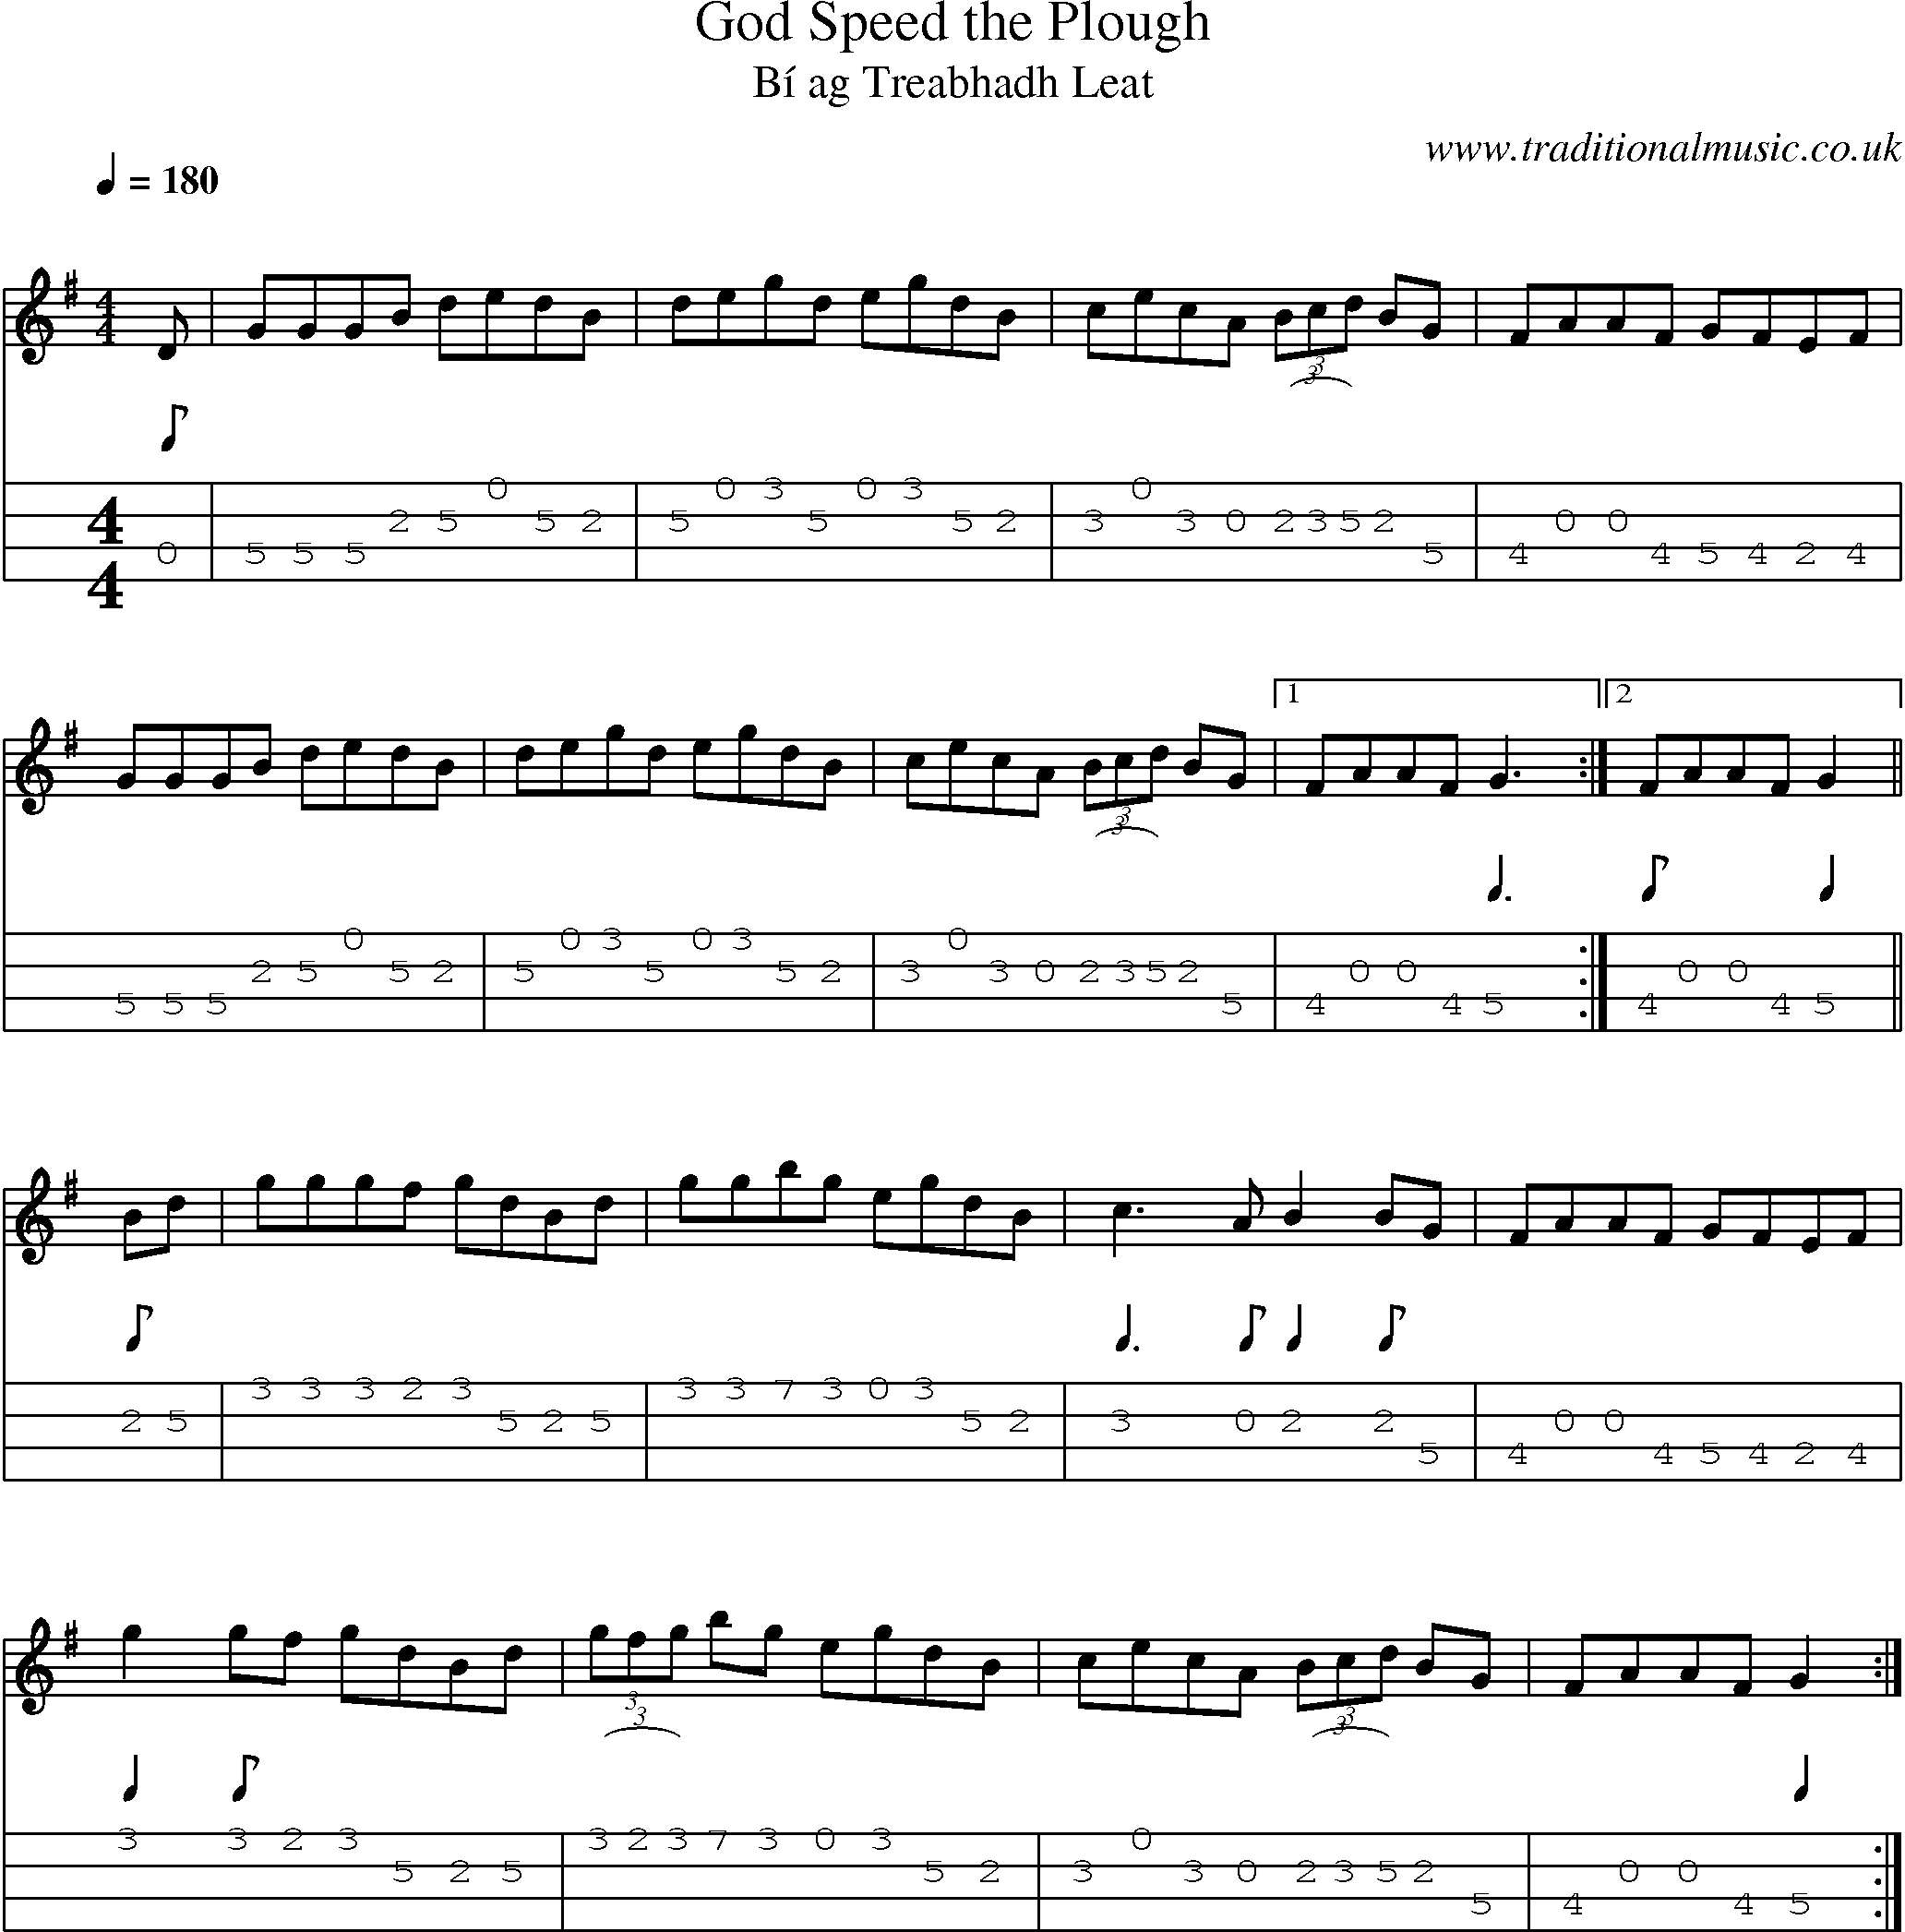 Music Score and Mandolin Tabs for God Speed Plough